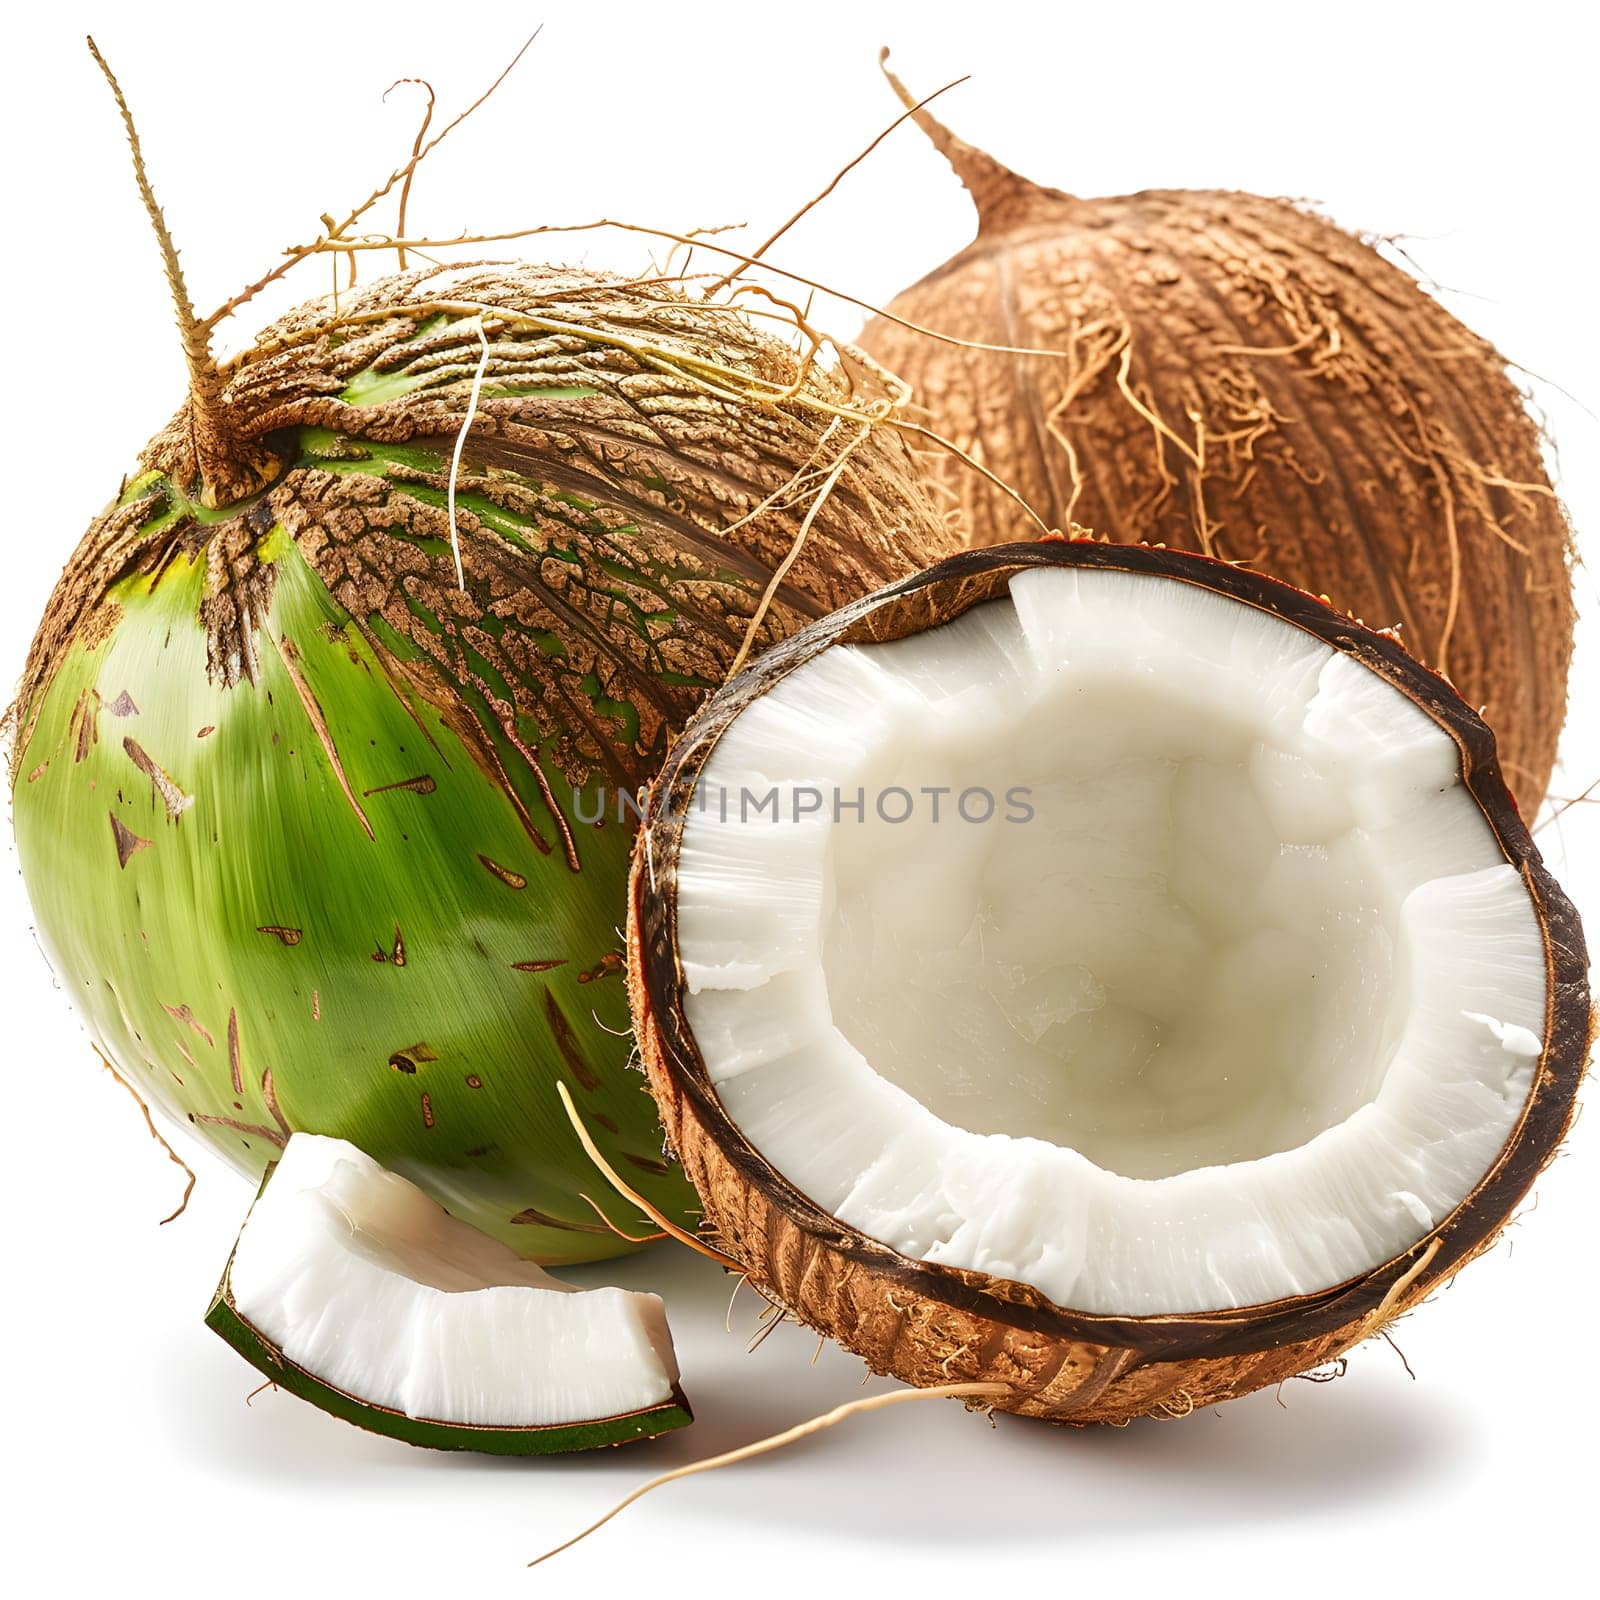 Assortment of coconuts including a green coconut on a white background by Nadtochiy